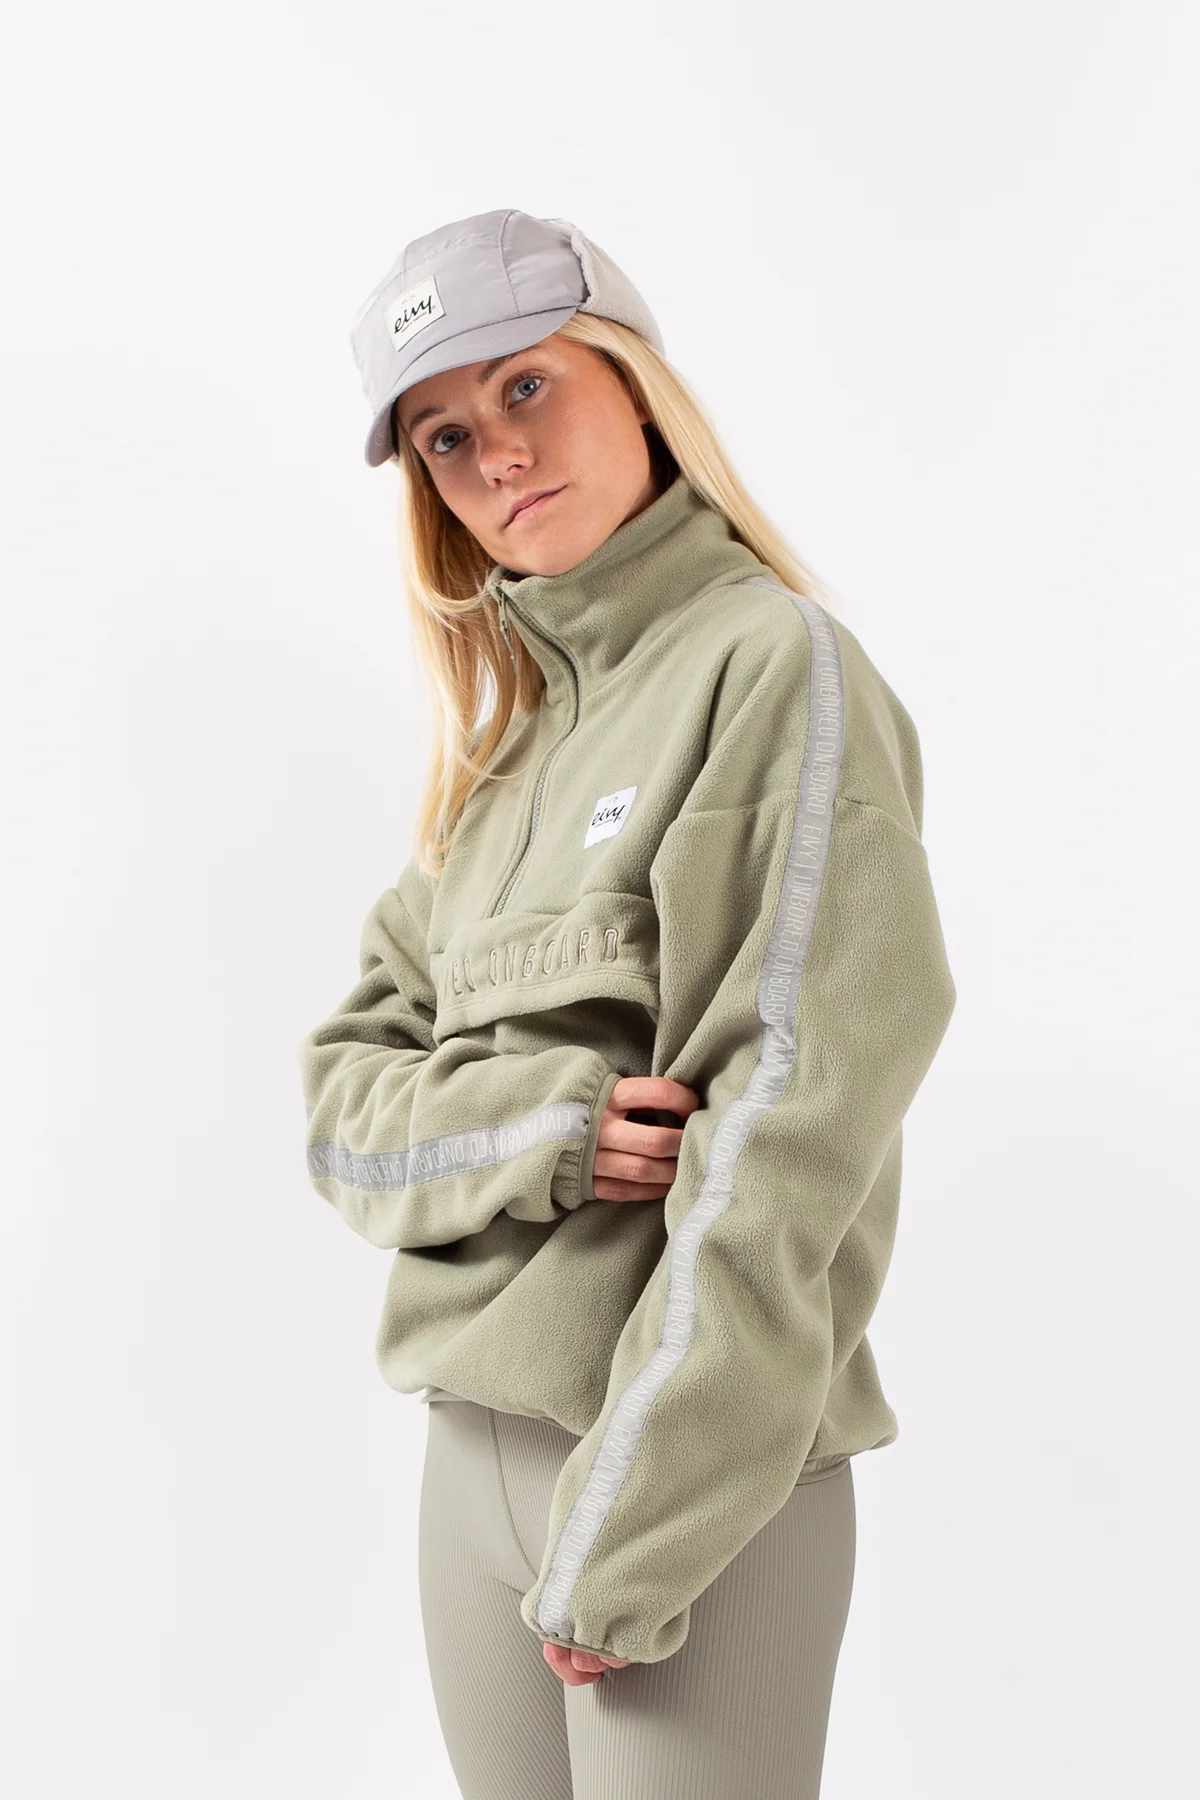 Womens Snowboard Jackets - Own It Now, Pay Later with Zip - Auski Australia